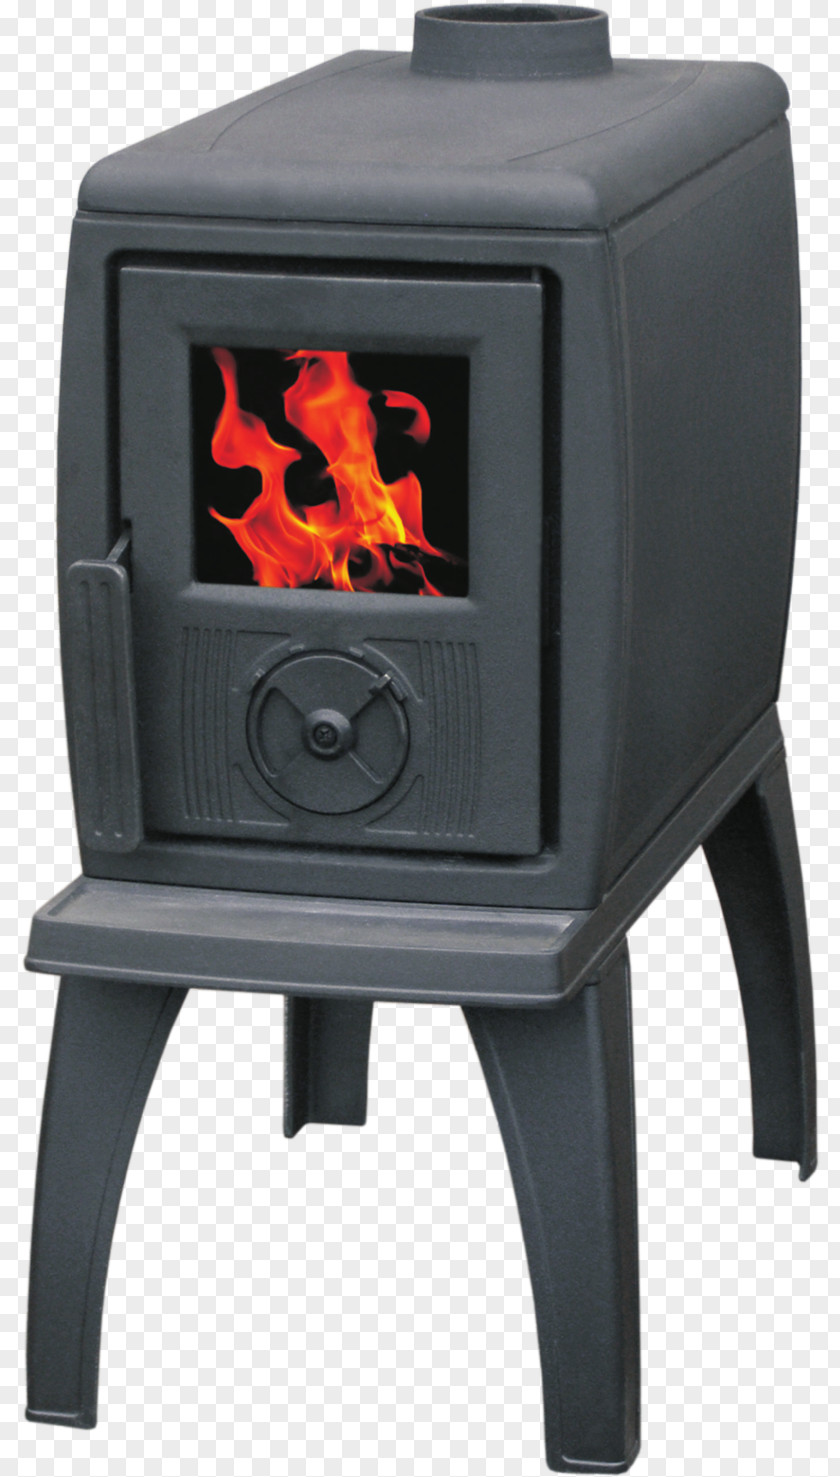 Stove Fire Fireplace Cast Iron Solid Fuel PNG